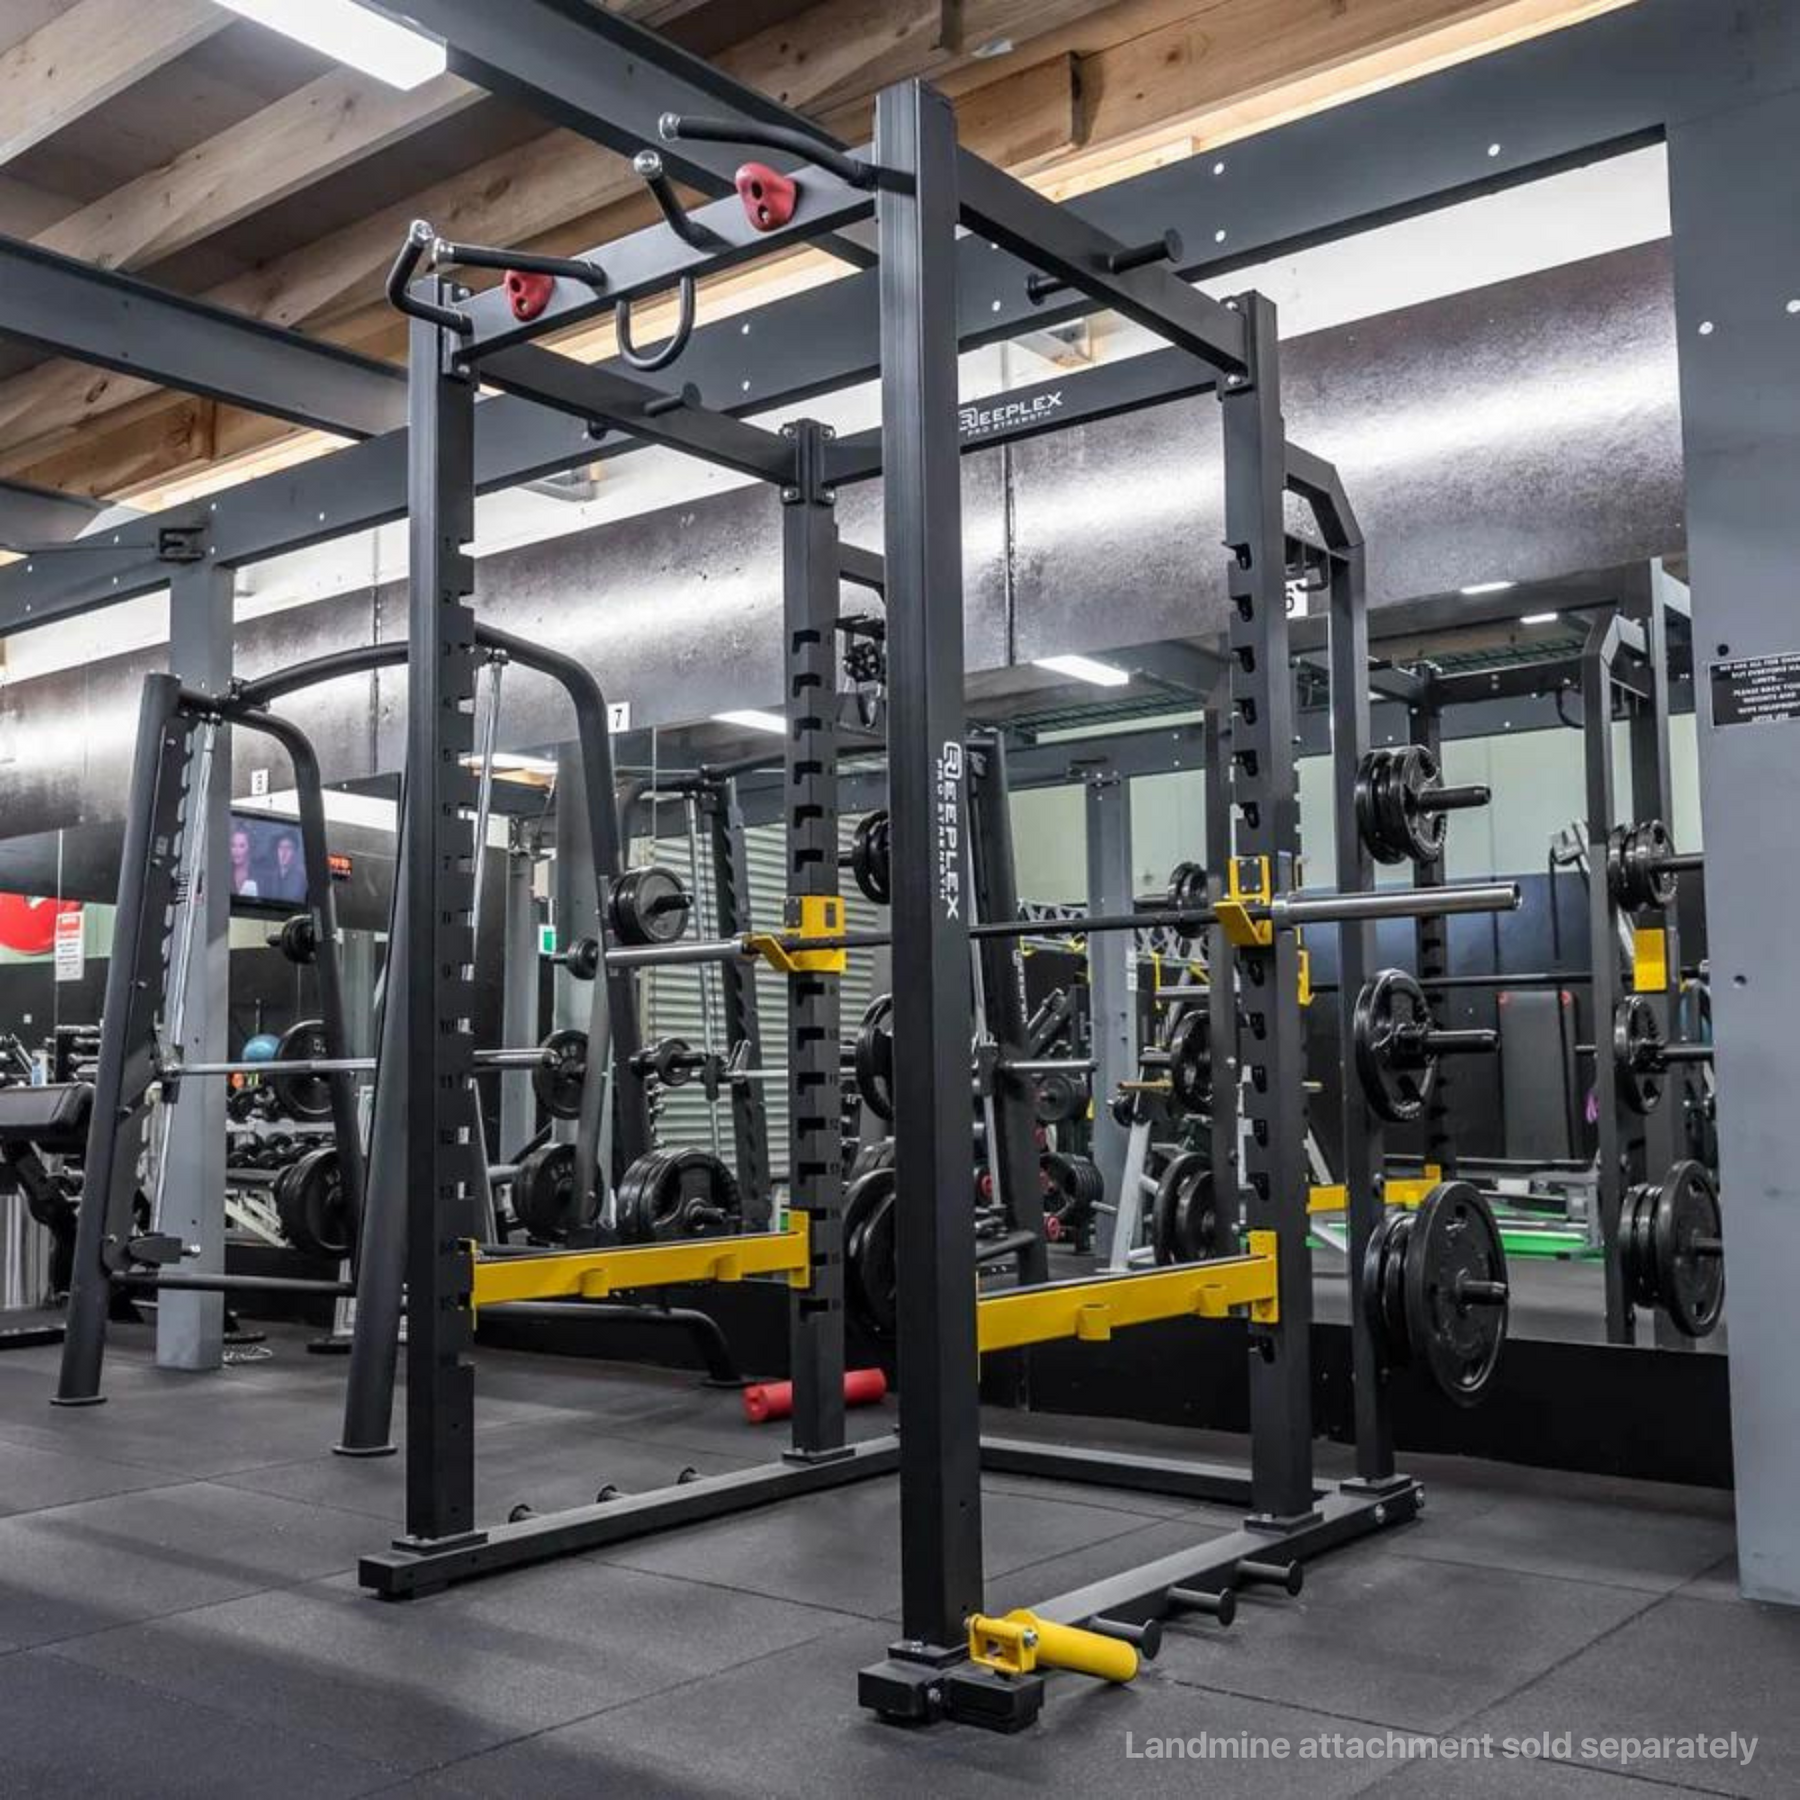 Reeplex Commercial Power Rack with Plate Storage